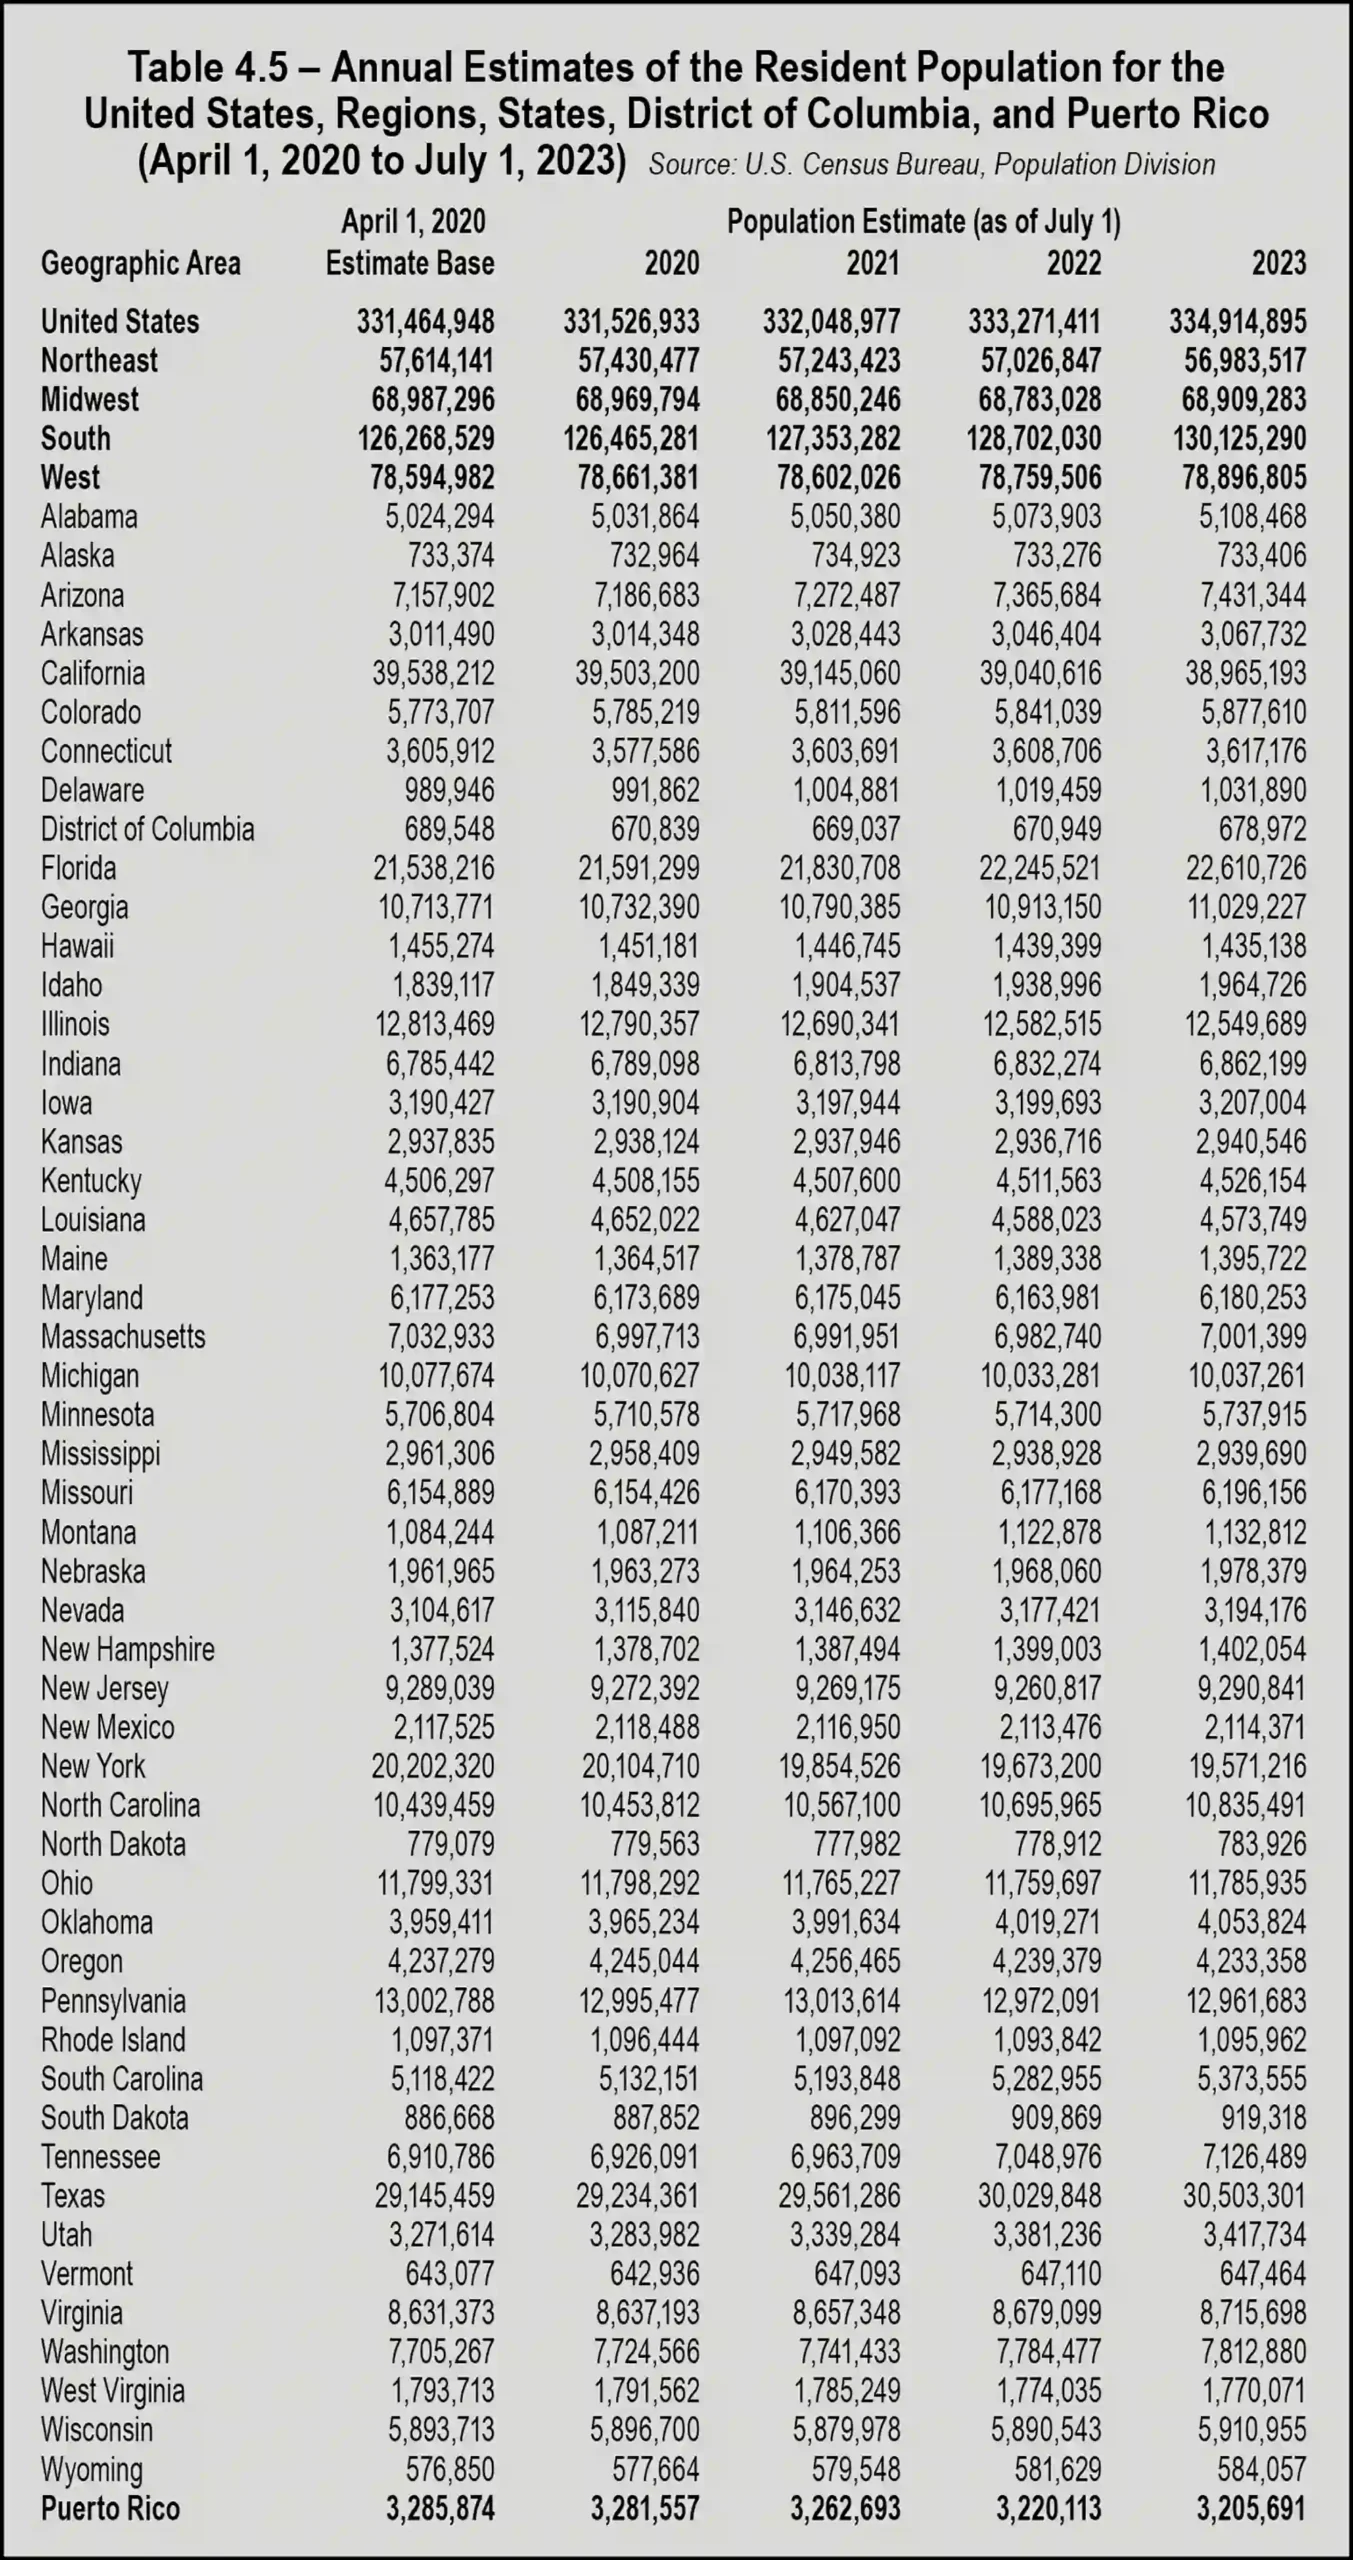 Table 4.5 - Annual Estimates of the Resident Population for the United States, Regions, States, District of Columbia, and Puerto Rico (April 1, 2020 to July 1, 2023)